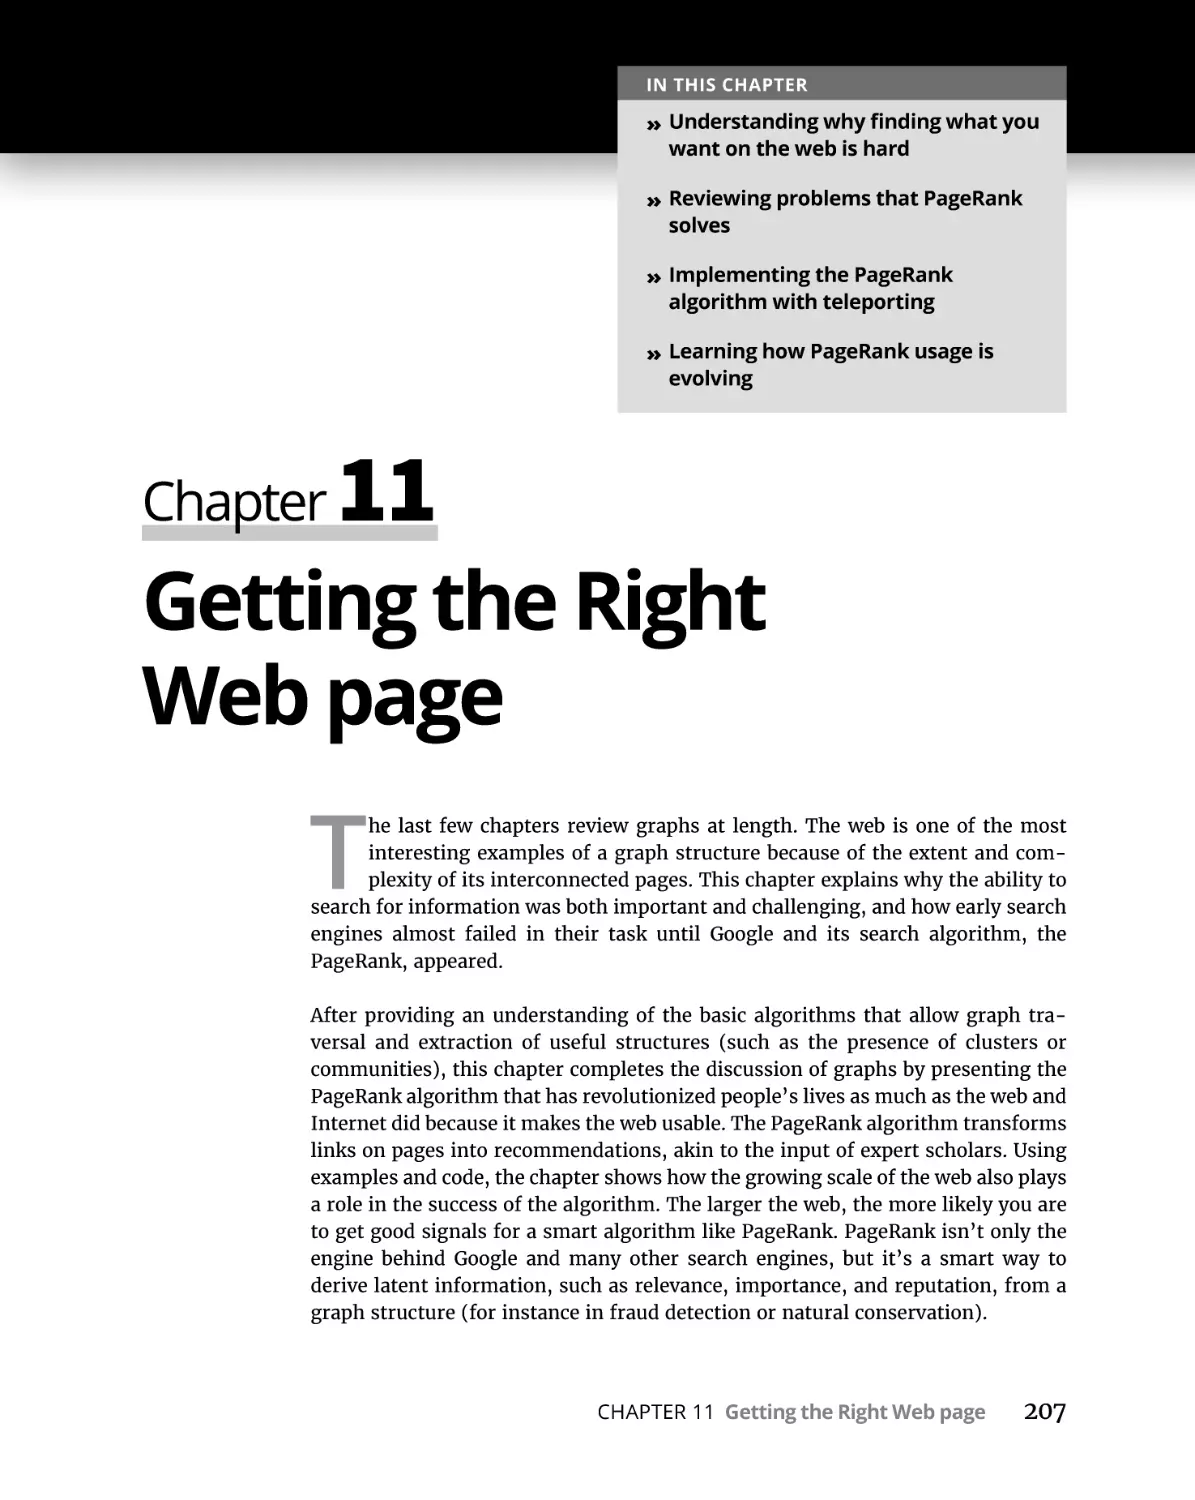 Chapter 11 Getting the Right Web page